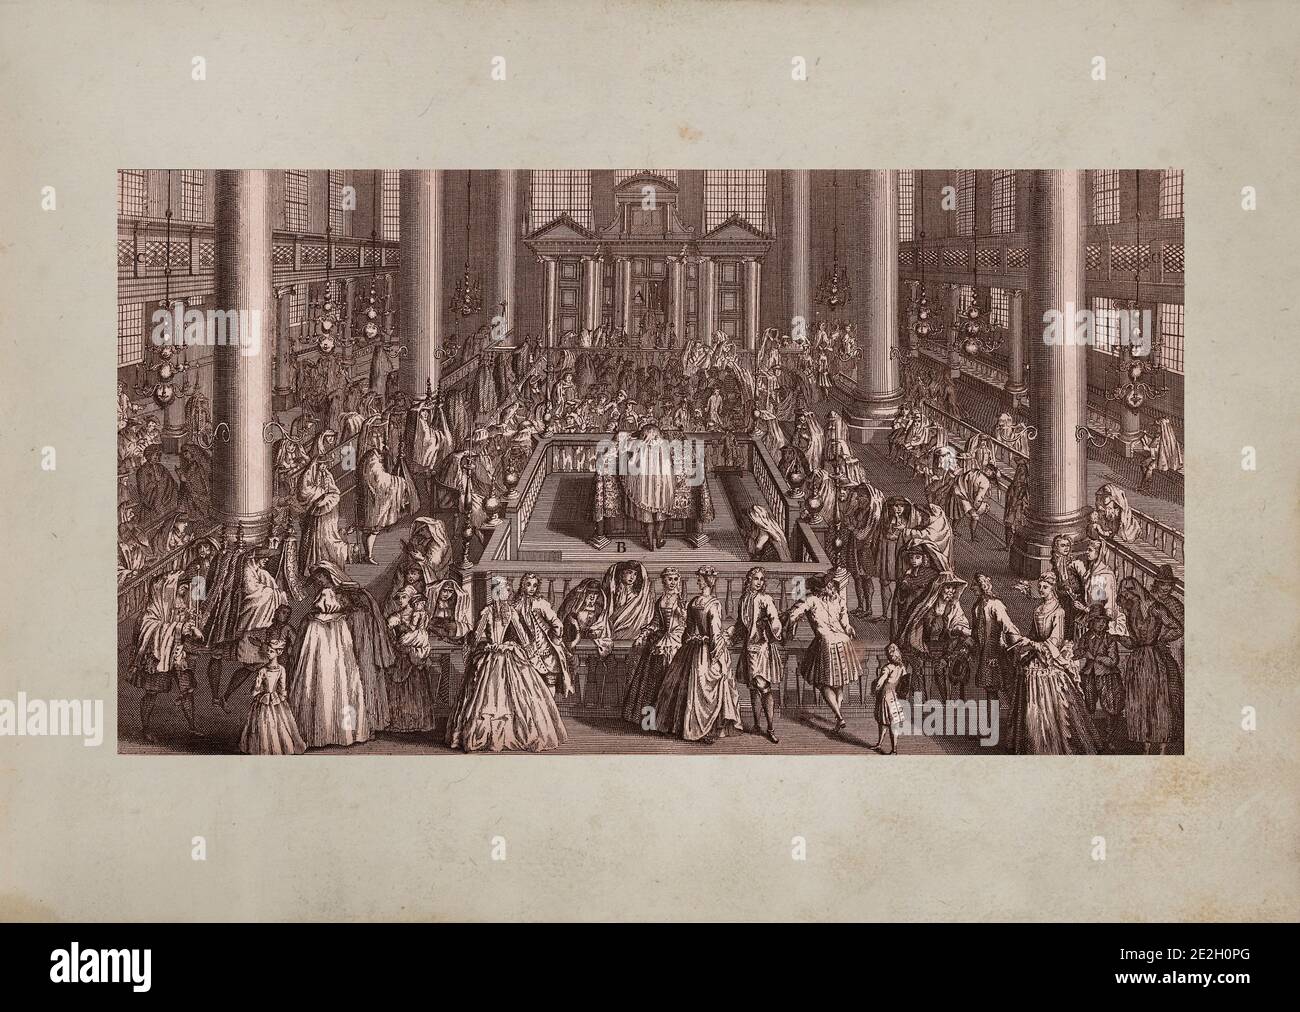 Engraving of the dedication of the portuguese jews sinagogue at Amsterdam. 18th century Stock Photo